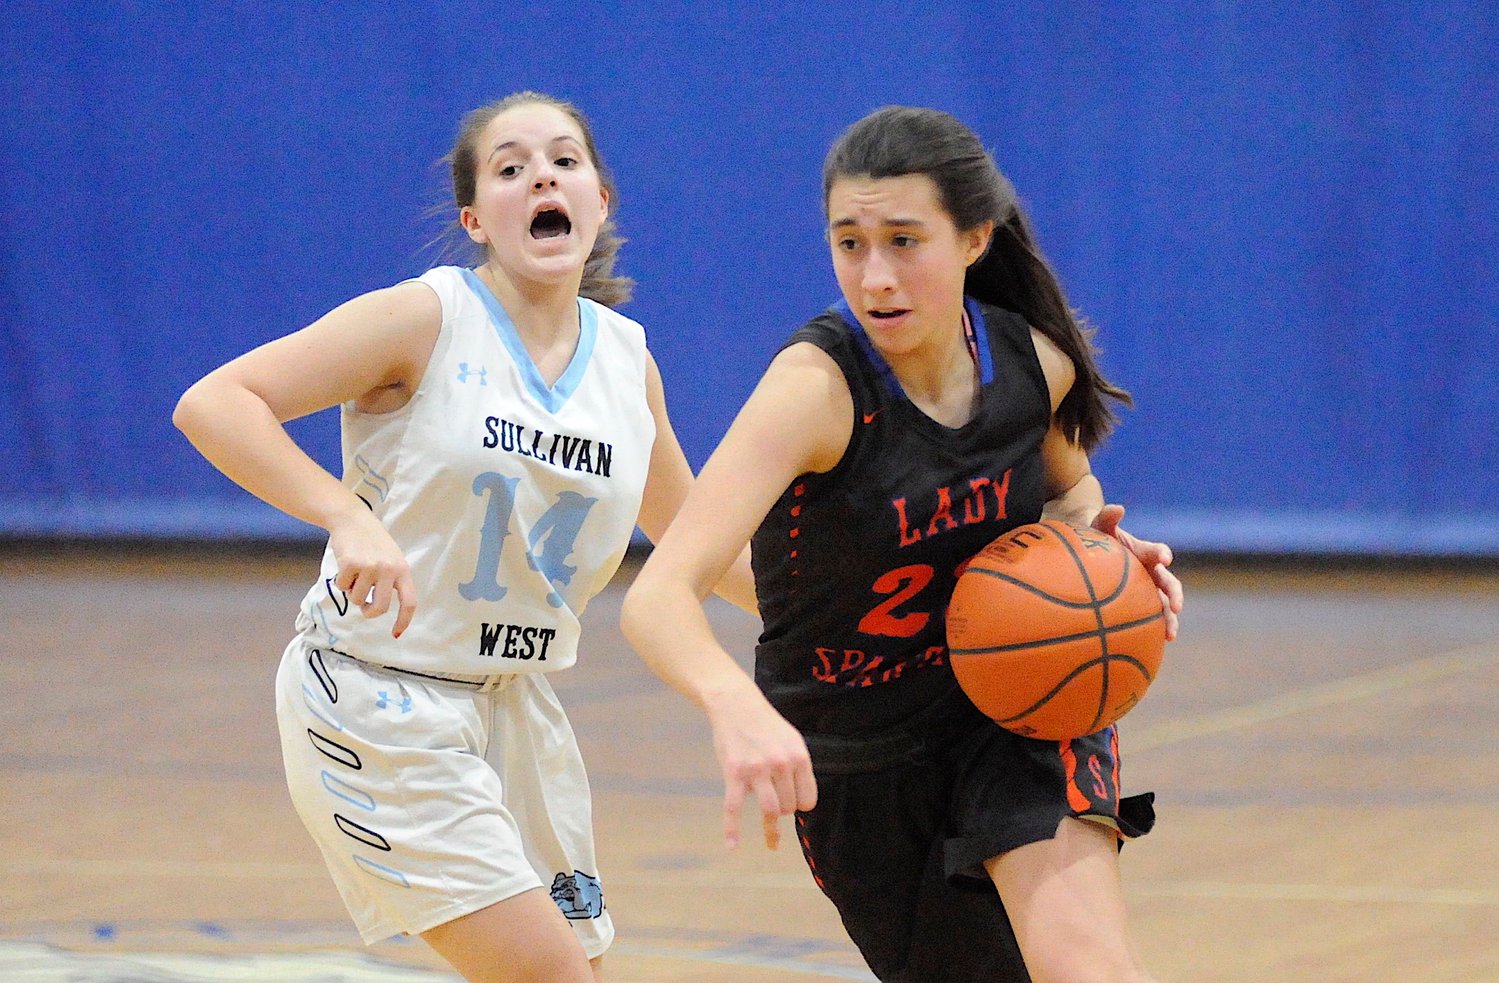 Shock and awe. Sullivan West’s Brielle Arnott registers surprise at the quick reaction time of Seward’s Shannon Sgambick, who posted 15 points at the final buzzer, while Arnott netted 8 including a two 3-pointers.